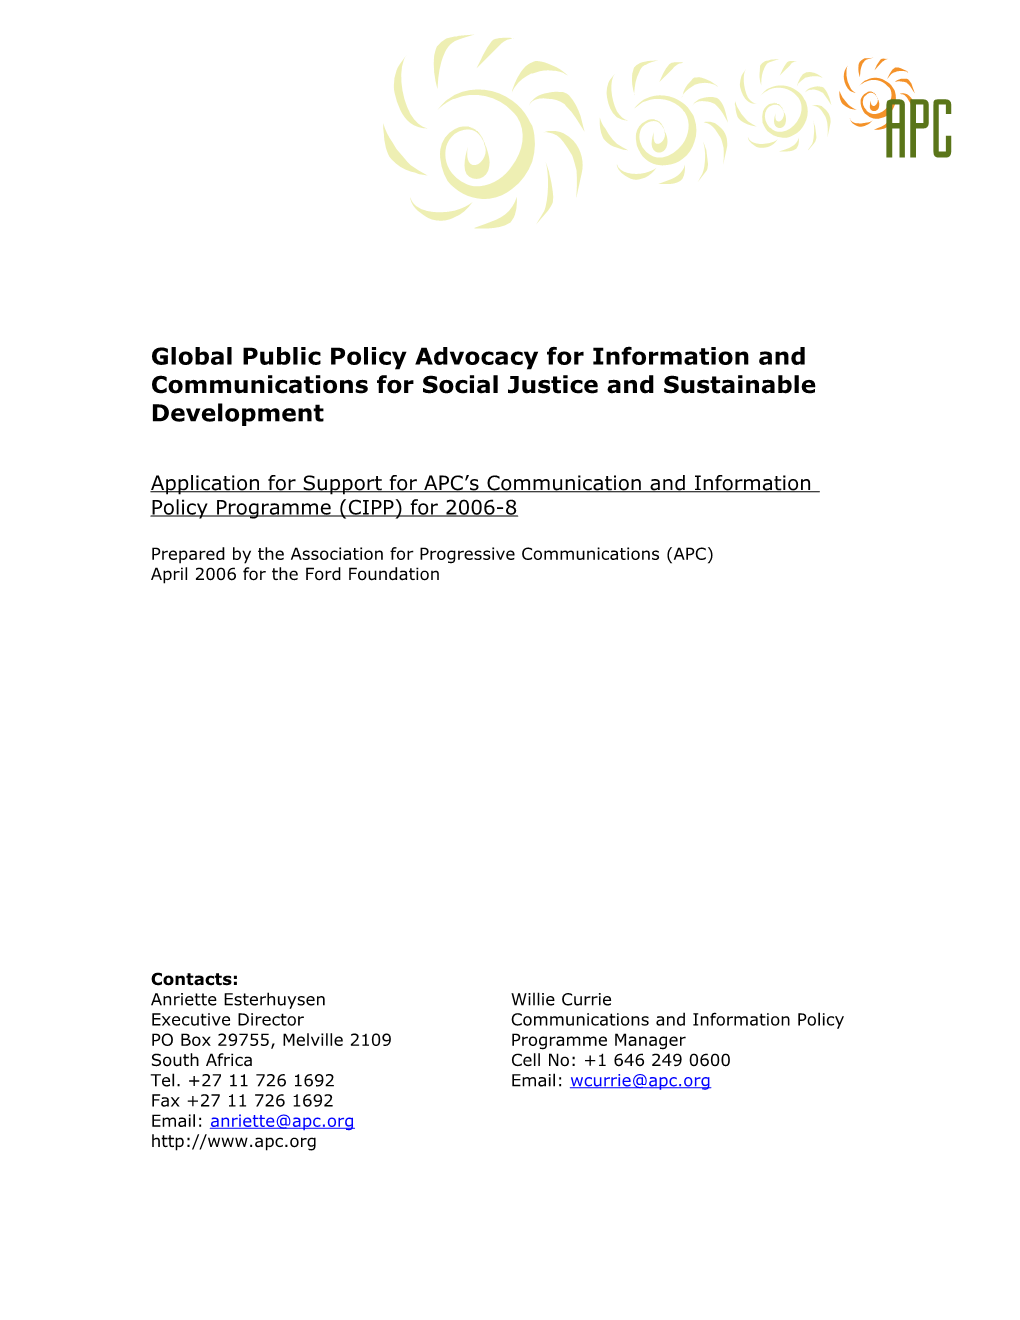 Global Public Policy Advocacy for Information and Communications for Social Justice And